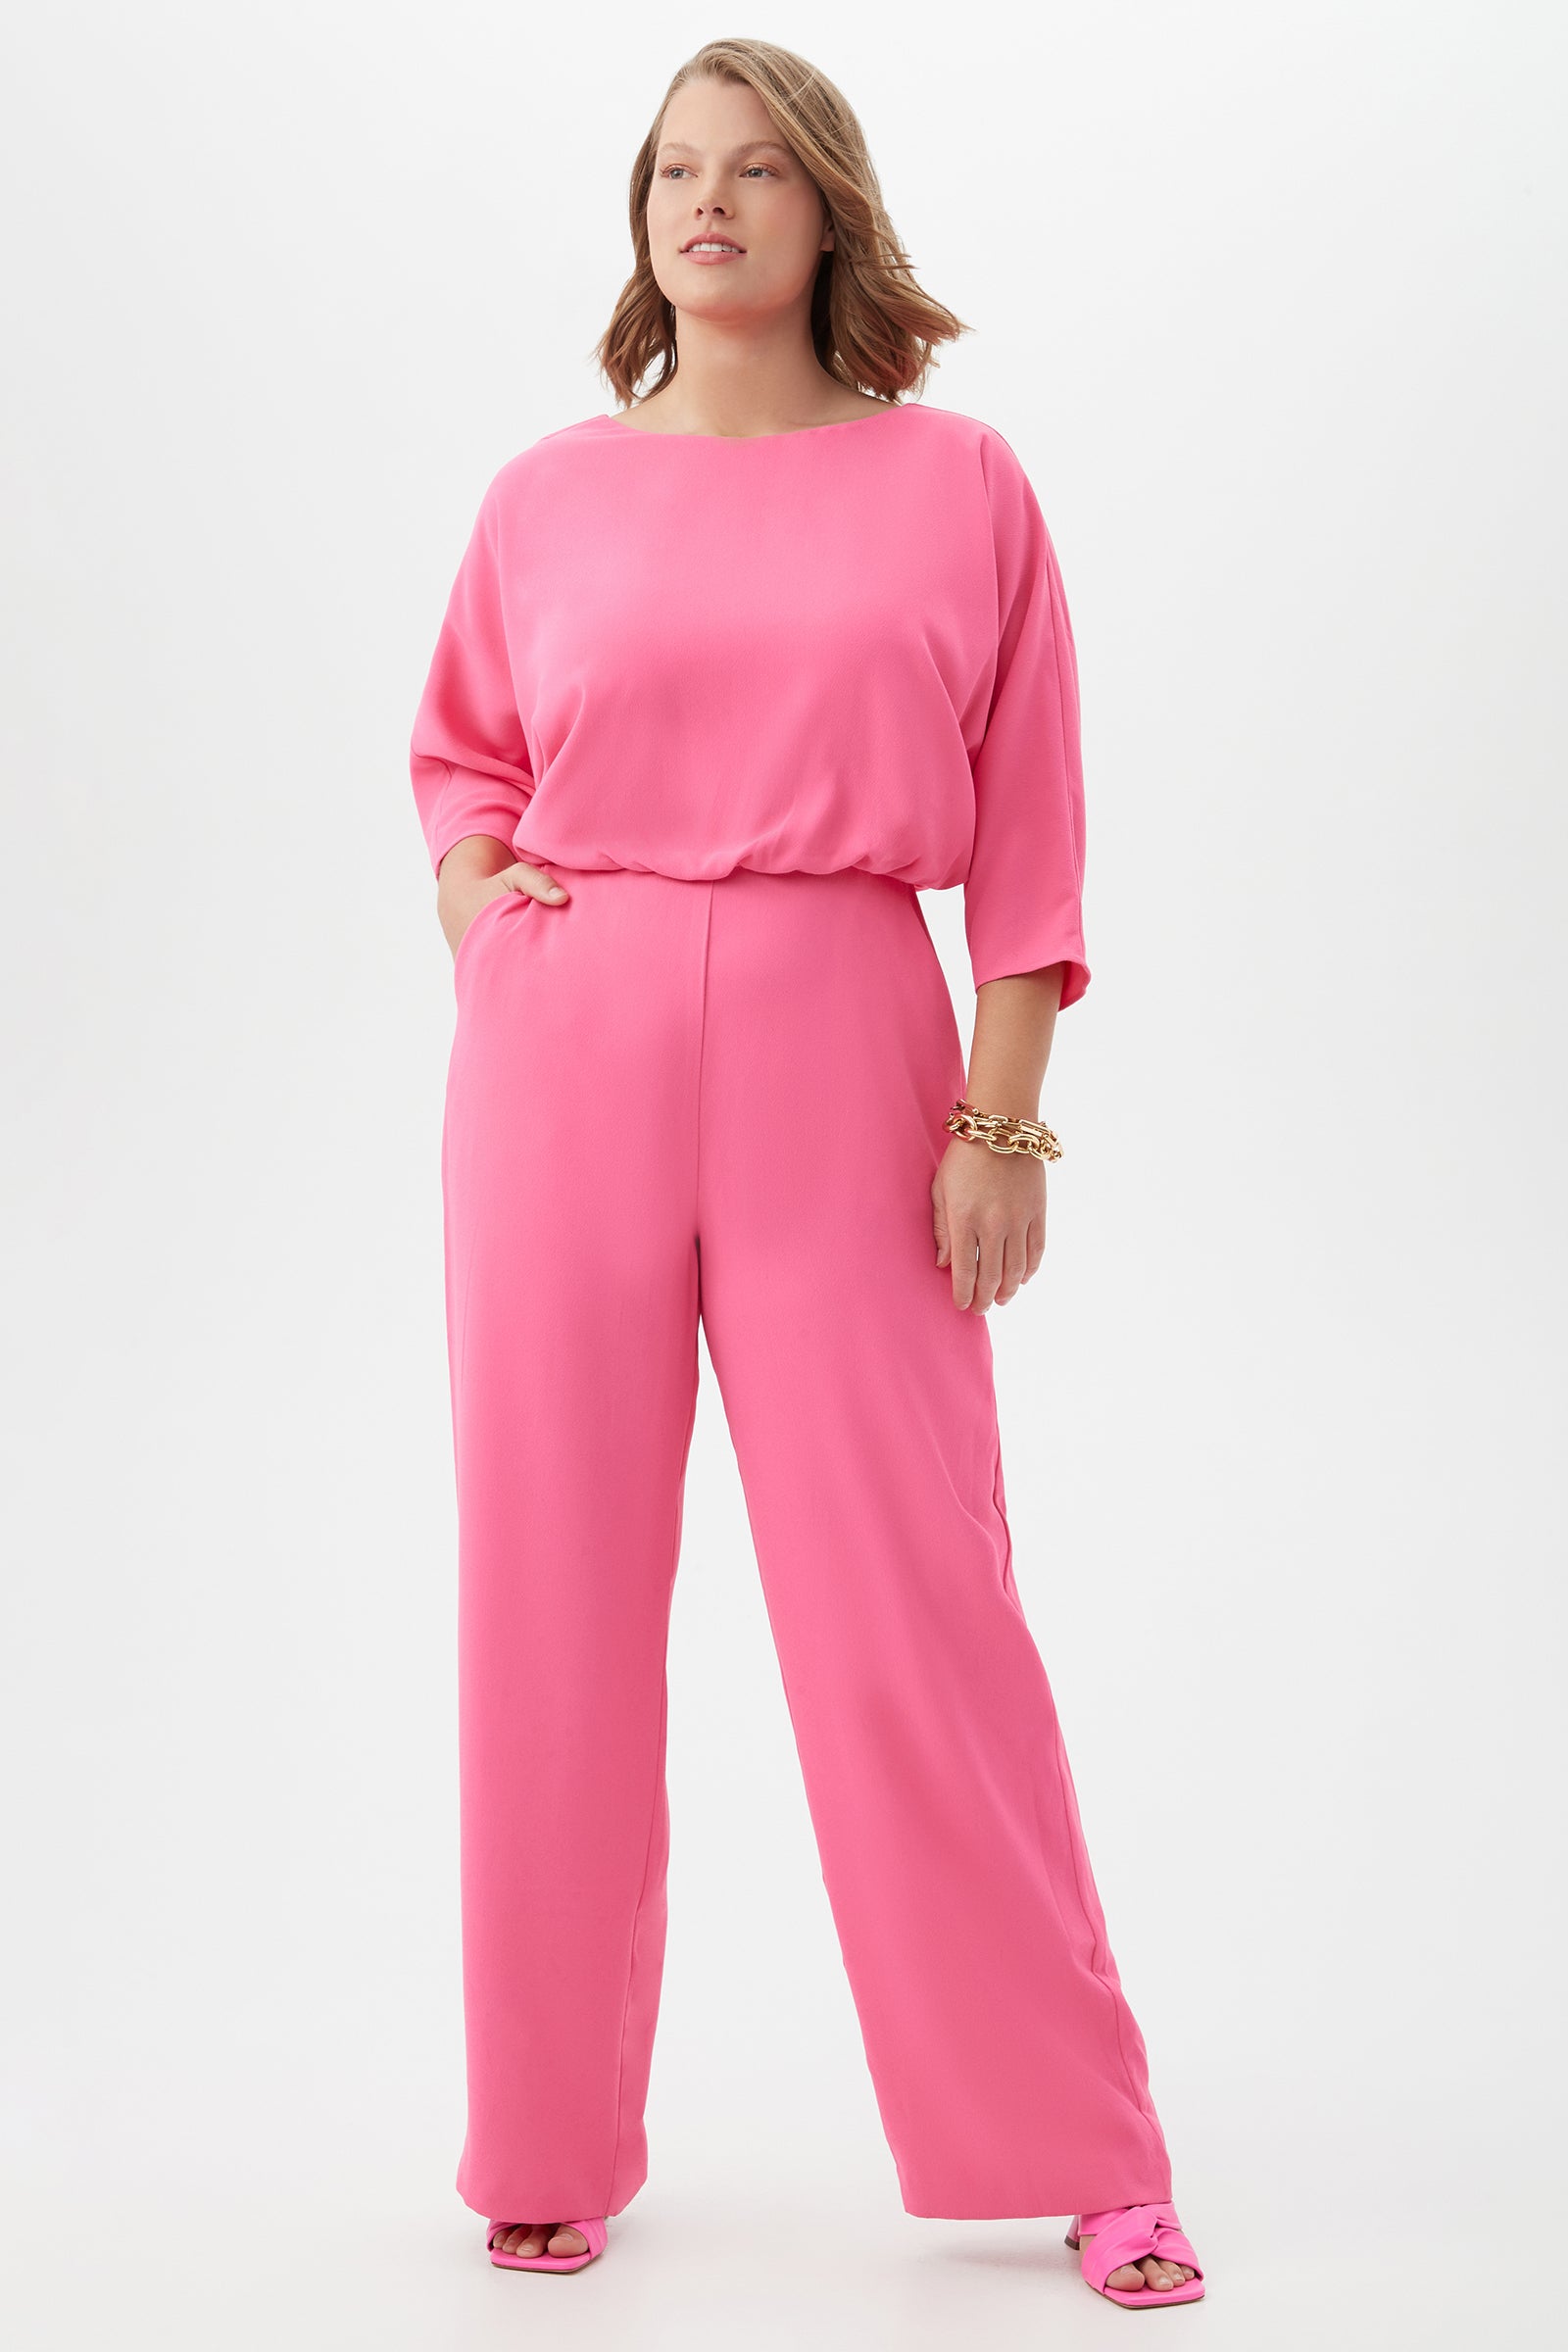 Hot Pink V-Neck Jumpsuit With Criss Cross Back and Pockets | Cute Jumpsuits  – Saved by the Dress